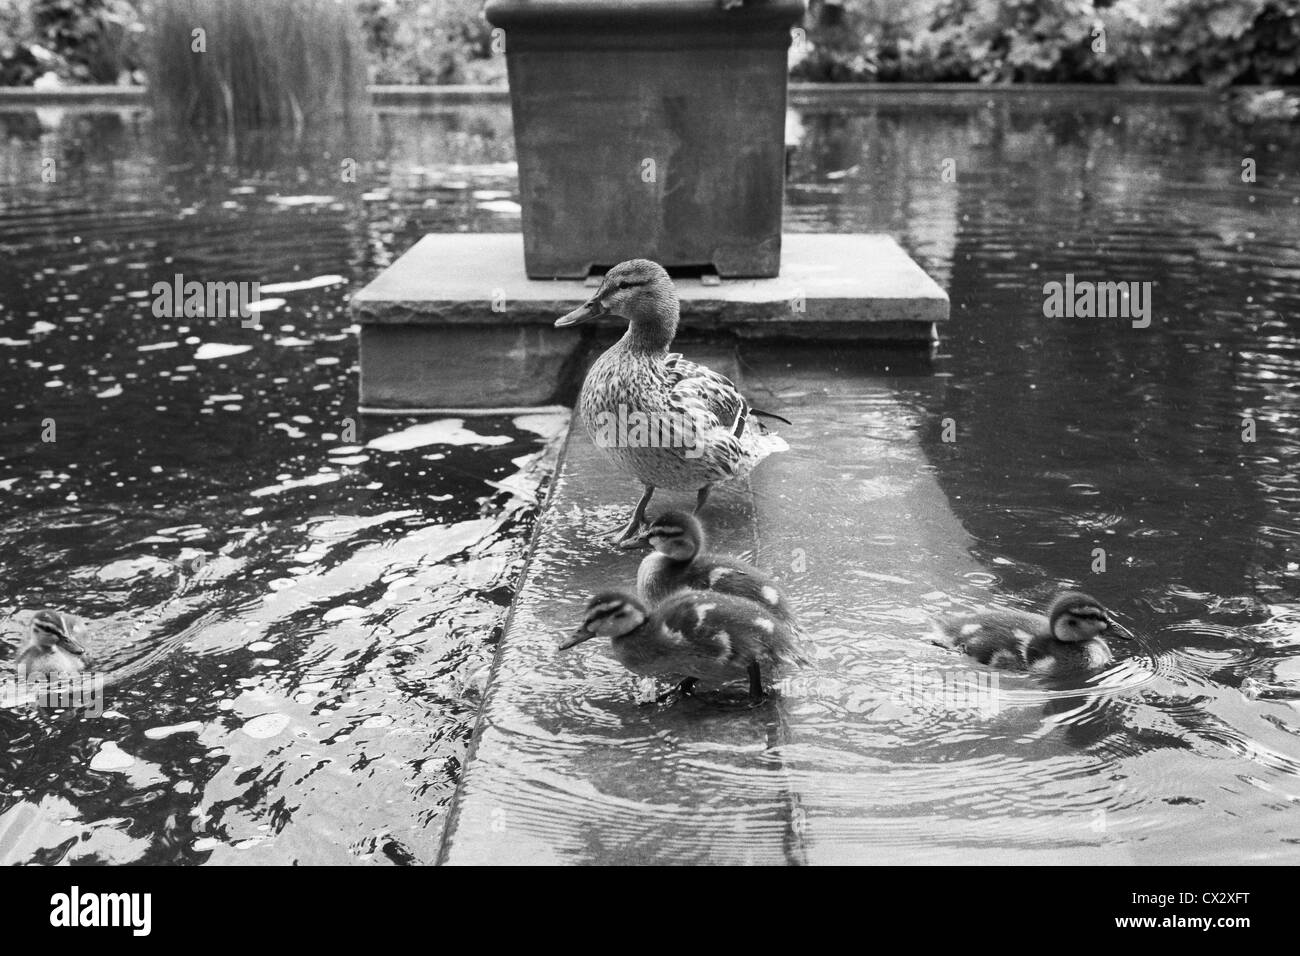 Mother duck watches over her young in a creek in park Planten un Blomen in Hamburg, Germany. Stock Photo